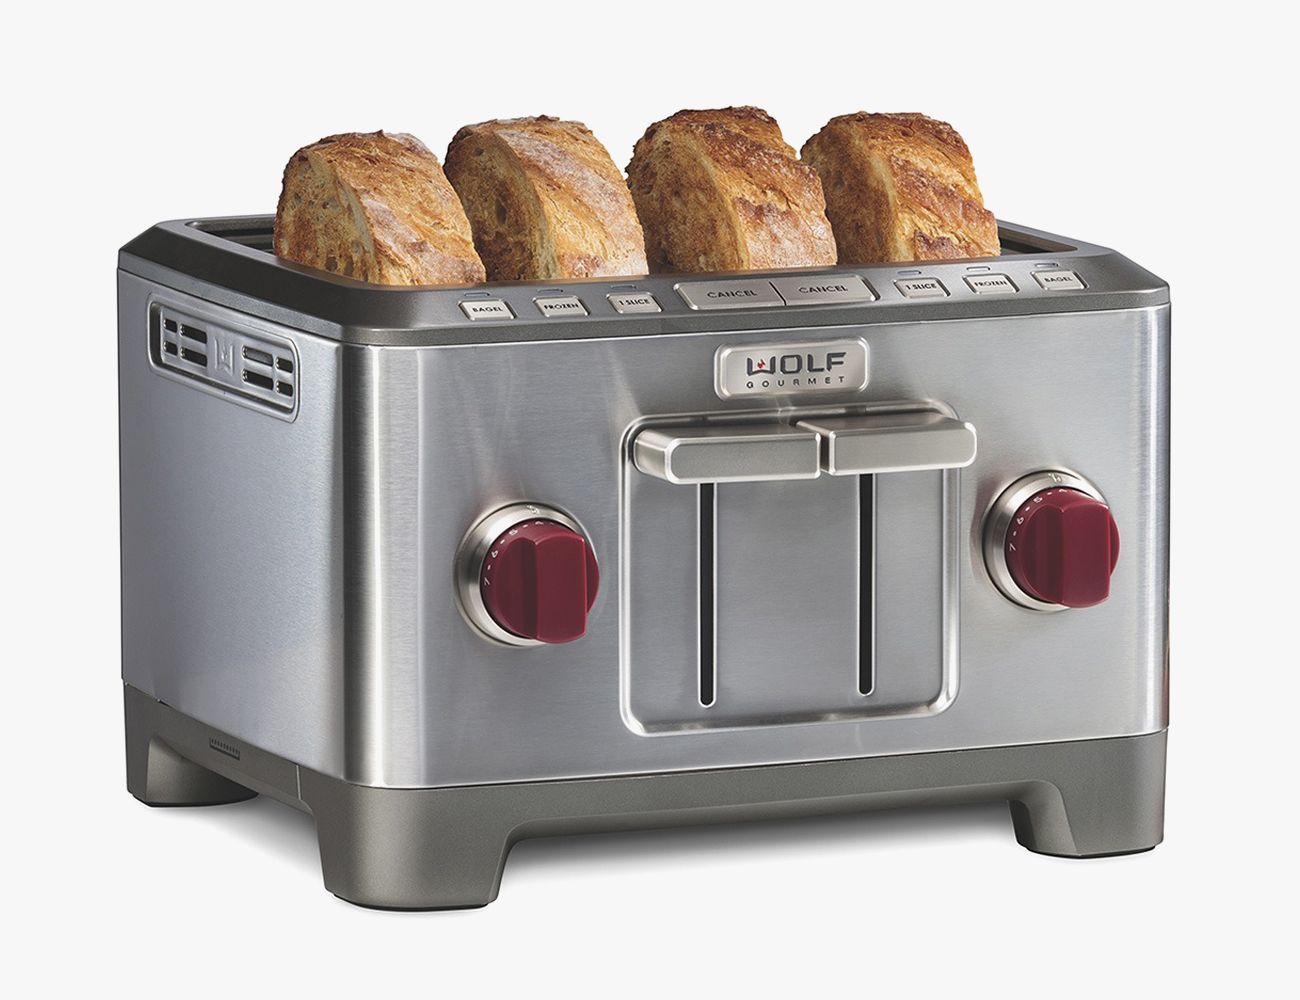 5 Toasters You'll Want to Leave Out on Your Counter - Gear Patrol